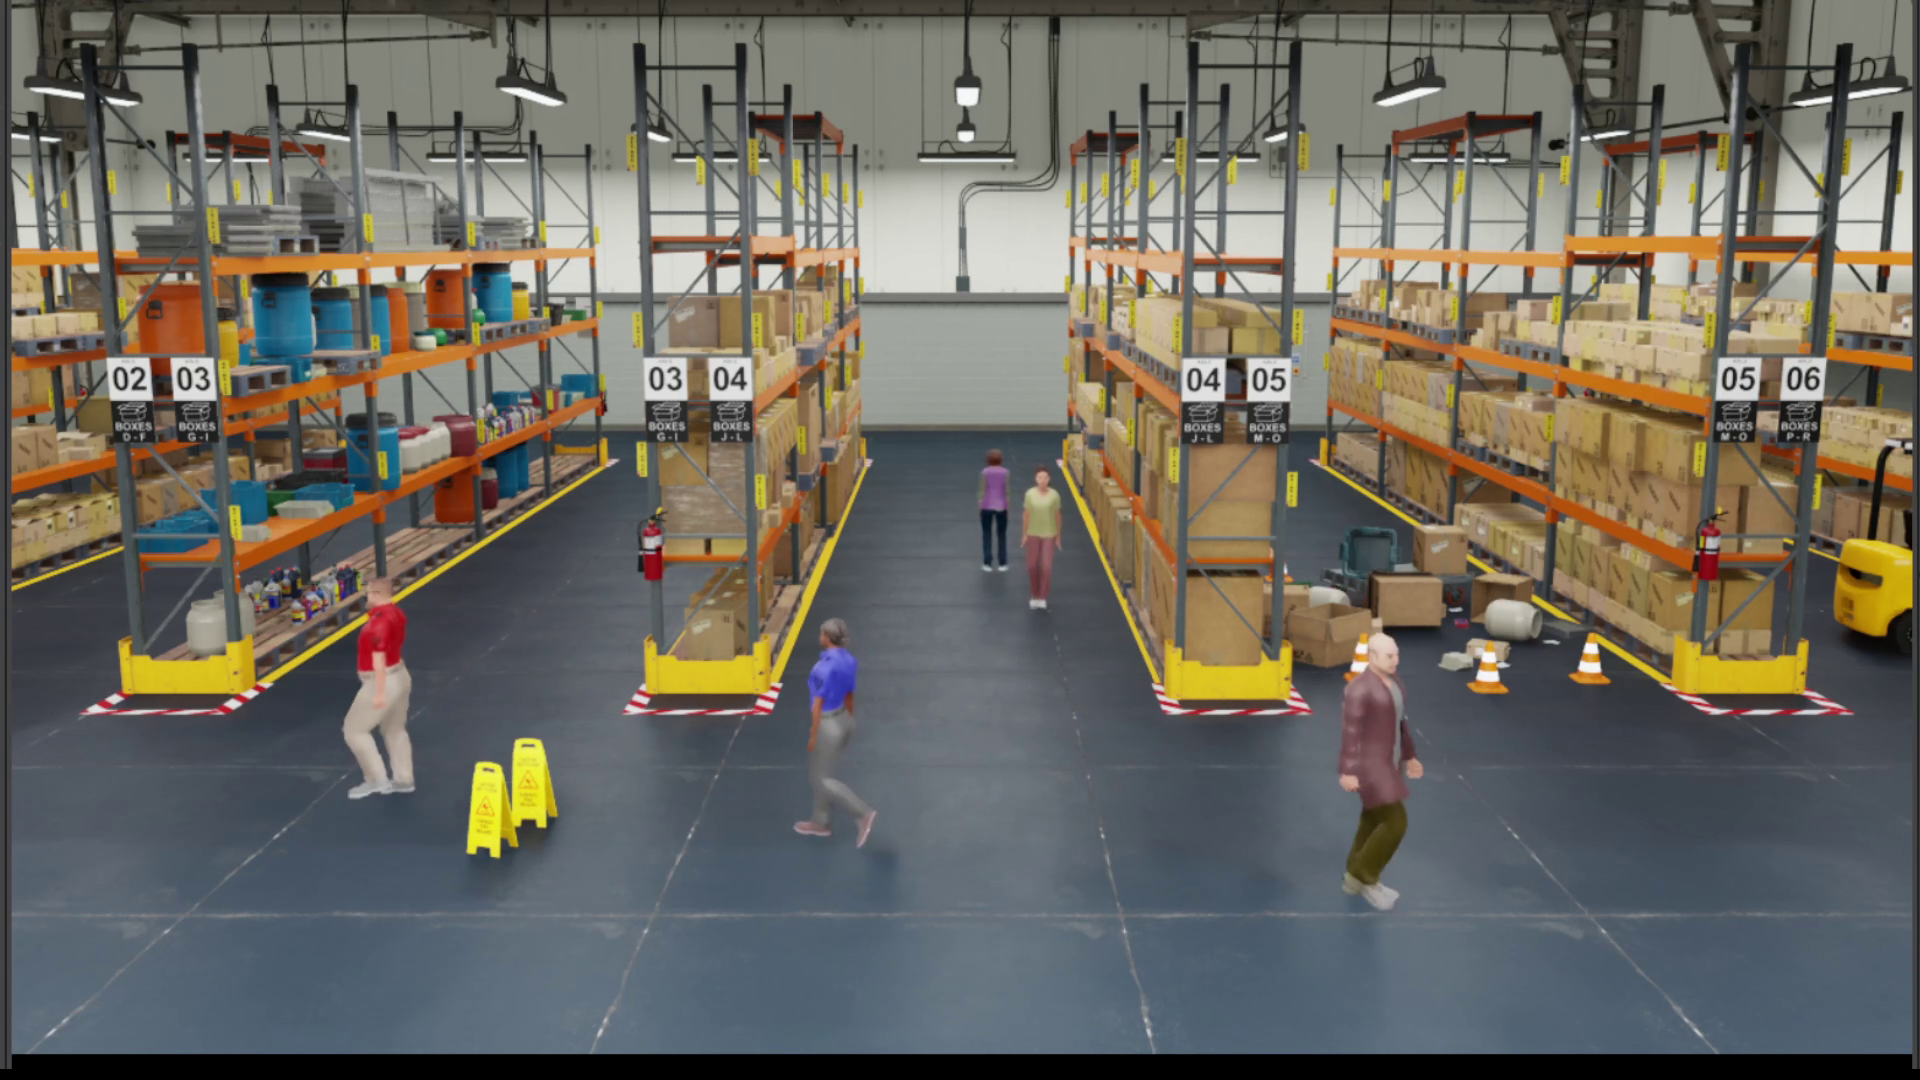 Image of several people walking around a warehouse scene.